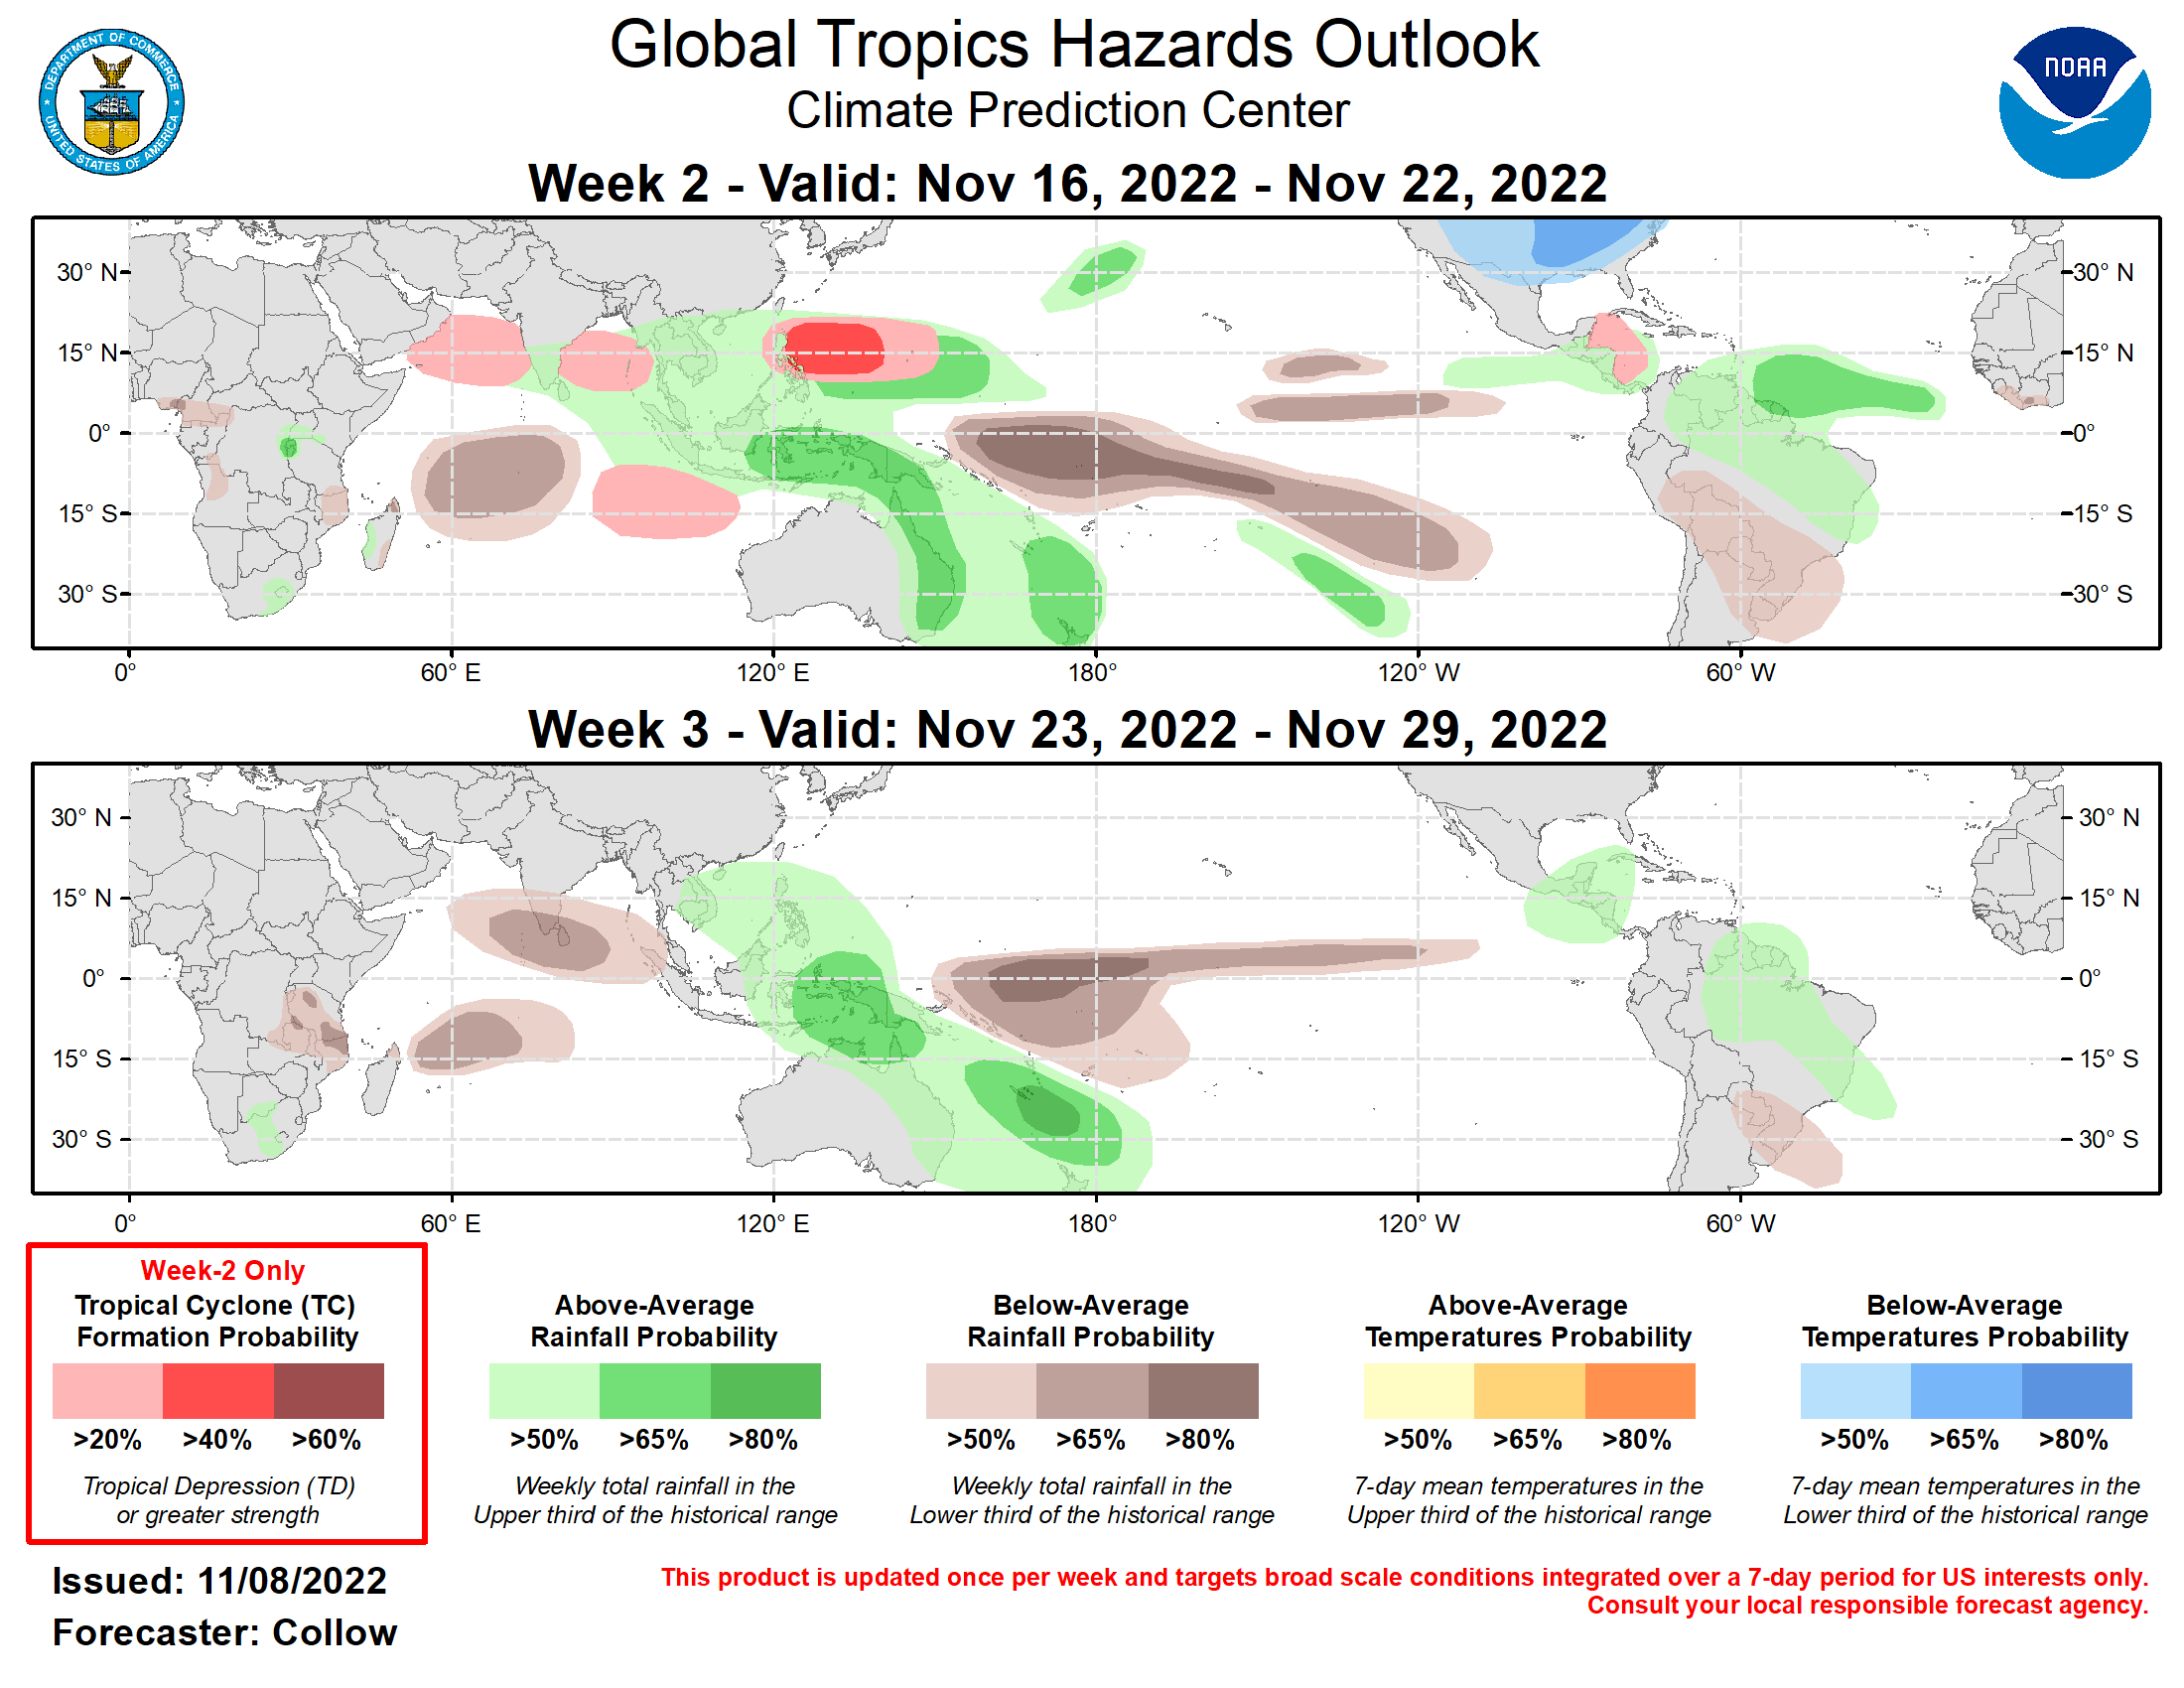 Outlook Discussion Last Updated - 11/08/22 Valid - 11/16/22 - 11/29/22 ﻿During the past week, there has been coherent eastward propagation of the RMM-based Madden Julian Oscillation (MJO) index through phase 7. However, the phase speed of the propagation in RMM space is more indicative of a Kelvin Wave rather than a true MJO. The ECMWF, JMA, and GEFS ensembles indicate a weakening of the enhanced convective signal in the short-term, with the RMM index decaying back into the unit circle. However, by week-2, these models depict a renewed MJO event across the Maritime Continent and West Pacific. While the global convective pattern has been spatially disorganized for the past couple of weeks, there has been some reorganization with enhanced convection becoming focused across North America, Atlantic, and Africa, and suppressed convection situated over the West Pacific. This pattern is notably out of phase with the current La Nina state, but is favored to revert back to a typical La Nina pattern in the next few weeks, aided by the forecast reemergence of the MJO over the Maritime Continent.  The enhanced convection across the Atlantic has led to an uptick in tropical cyclone (TC) activity with two TCs forming over the basin in the past week. Hurricane Martin tracked across the North Atlantic before dissipating on 11/3. Tropical storm Nicole developed on 11/7 and is forecast to reach hurricane strength before impacting Florida over the next few days. The Eastern and Western Pacific basins have been quiet during the past week, tied to suppressed convection across the Western Pacific and an overall diminishing climatology. A tropical storm (04S) developed across the Southern Indian Ocean on 11/4. This system was short-lived and did not impact any land areas.  Looking ahead, TC development chances are likely to diminish across both the North Atlantic and East Pacific basins as the hurricane season draws to a close. The National Hurricane Center is monitoring Invest 97L over the open central Atlantic. This disturbance currently has a 30 percent chance of developing into a TC during the next 5-days, although its potential has been decreasing over the past few days. By week-2, ECMWF and GEFS ensembles indicate surface low pressure in the western Caribbean that may organize into a TC, justifying a 20 percent TC formation area in this region during week-2.  Following a relatively quiet period, TC development is forecast to increase across parts of the Indian Ocean and West Pacific, corresponding to a renewed MJO propagation by week-2. There are increased signals in the dynamical model guidance over both the Arabian Sea and Bay of Bengal, as well as over the southern Indian Ocean, which are consistent with climatology and the forecast phase 5-6 of the MJO. Therefore, 20% chances for TC formation are highlighted over these areas. TC development is also possible to the east of the Philippines during week-2 (40% chance) as enhanced convection returns to the region.  The precipitation outlook for the next two weeks is based on anticipated TC tracks, ongoing La Nina conditions, and consensus of GEFS, CFS, and ECMWF ensemble mean solutions. Suppressed (enhanced) rainfall continues near and to the east of the Date Line (over the Maritime Continent and western Pacific) due to ongoing La Nina conditions and the forecast reemergence of the MJO signal over the region. Enhanced rainfall is likely to continue across the equatorial Atlantic and northern South America contributing to continued flooding concerns. While elevated rainfall chances are more likely initially over the Indian Ocean early in week-2, the eastward propagation of the MJO favors a trend toward drier conditions for weeks 2 and 3 as a whole. Below normal temperatures are forecast across much of the continental U.S., tied to predicted strong mid-latitude troughing.